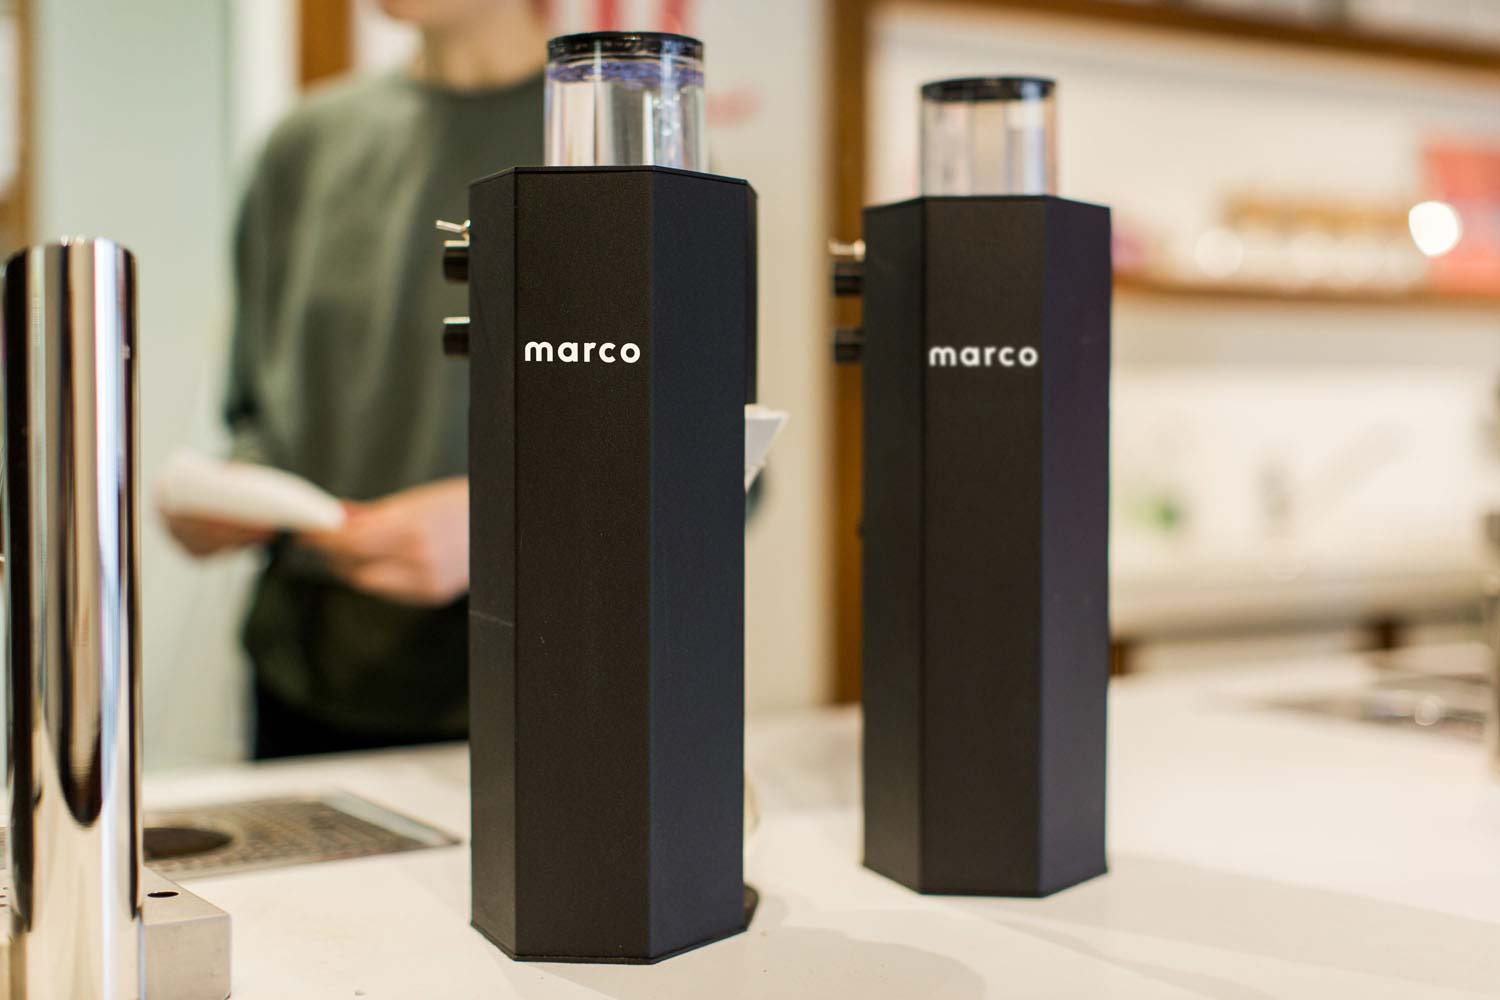 MARCO – An indispensable Hot Water System for your coffee shop